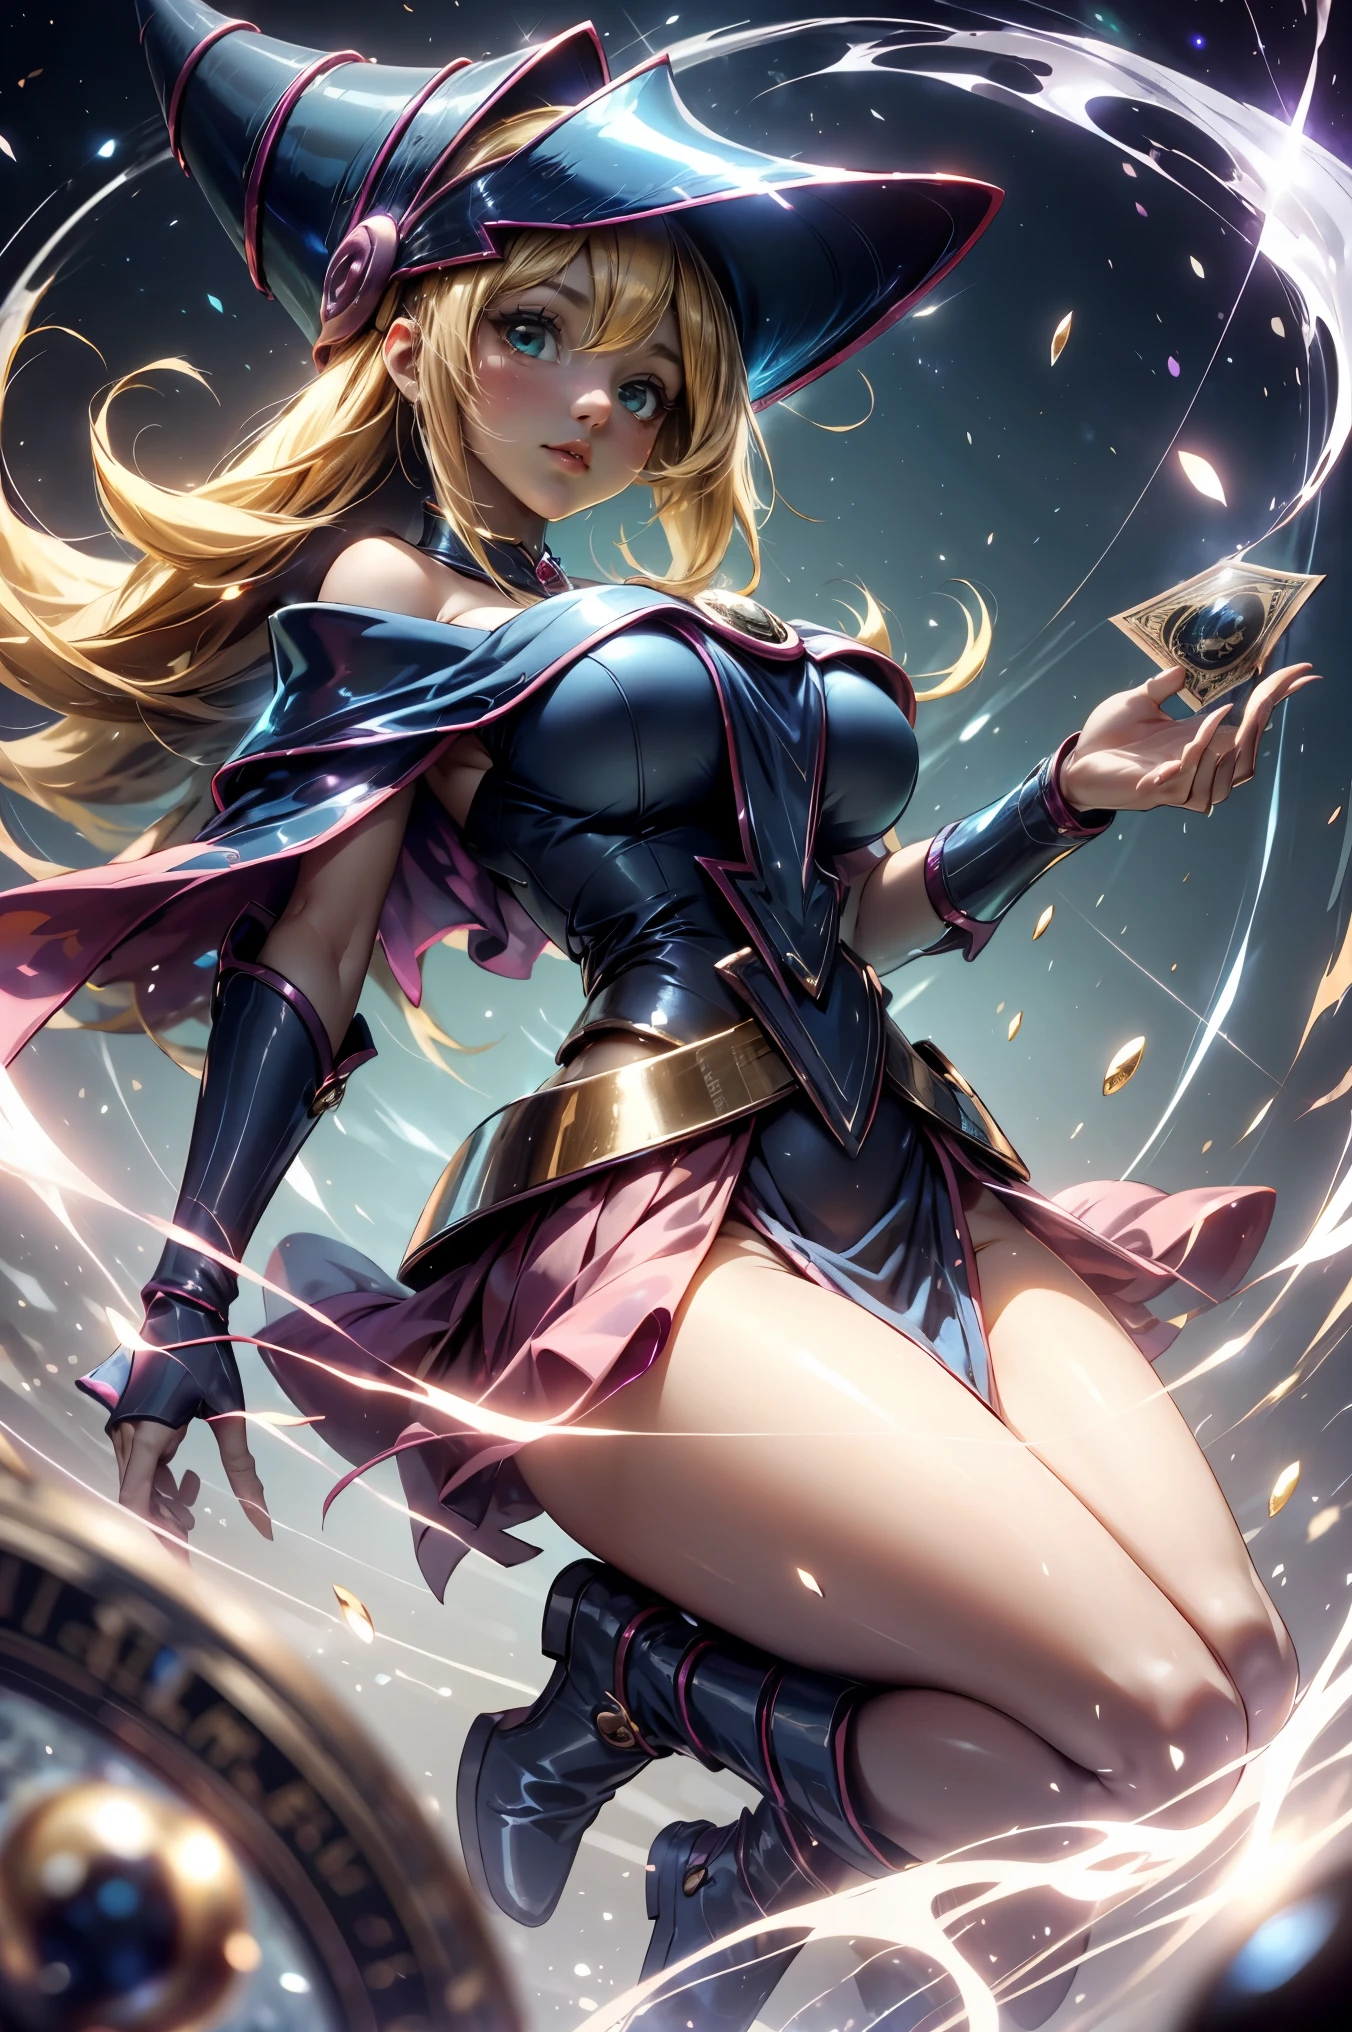 (masterpiece:1.2), (The best quality:1.2), perfect lighting, Dark Magician Girl casting a spell, floating in the air, big tits, neckline, magic background. Transparent hearts in the air, blue robe, big hat, from above, Sparkles, Yugioh Card in the background